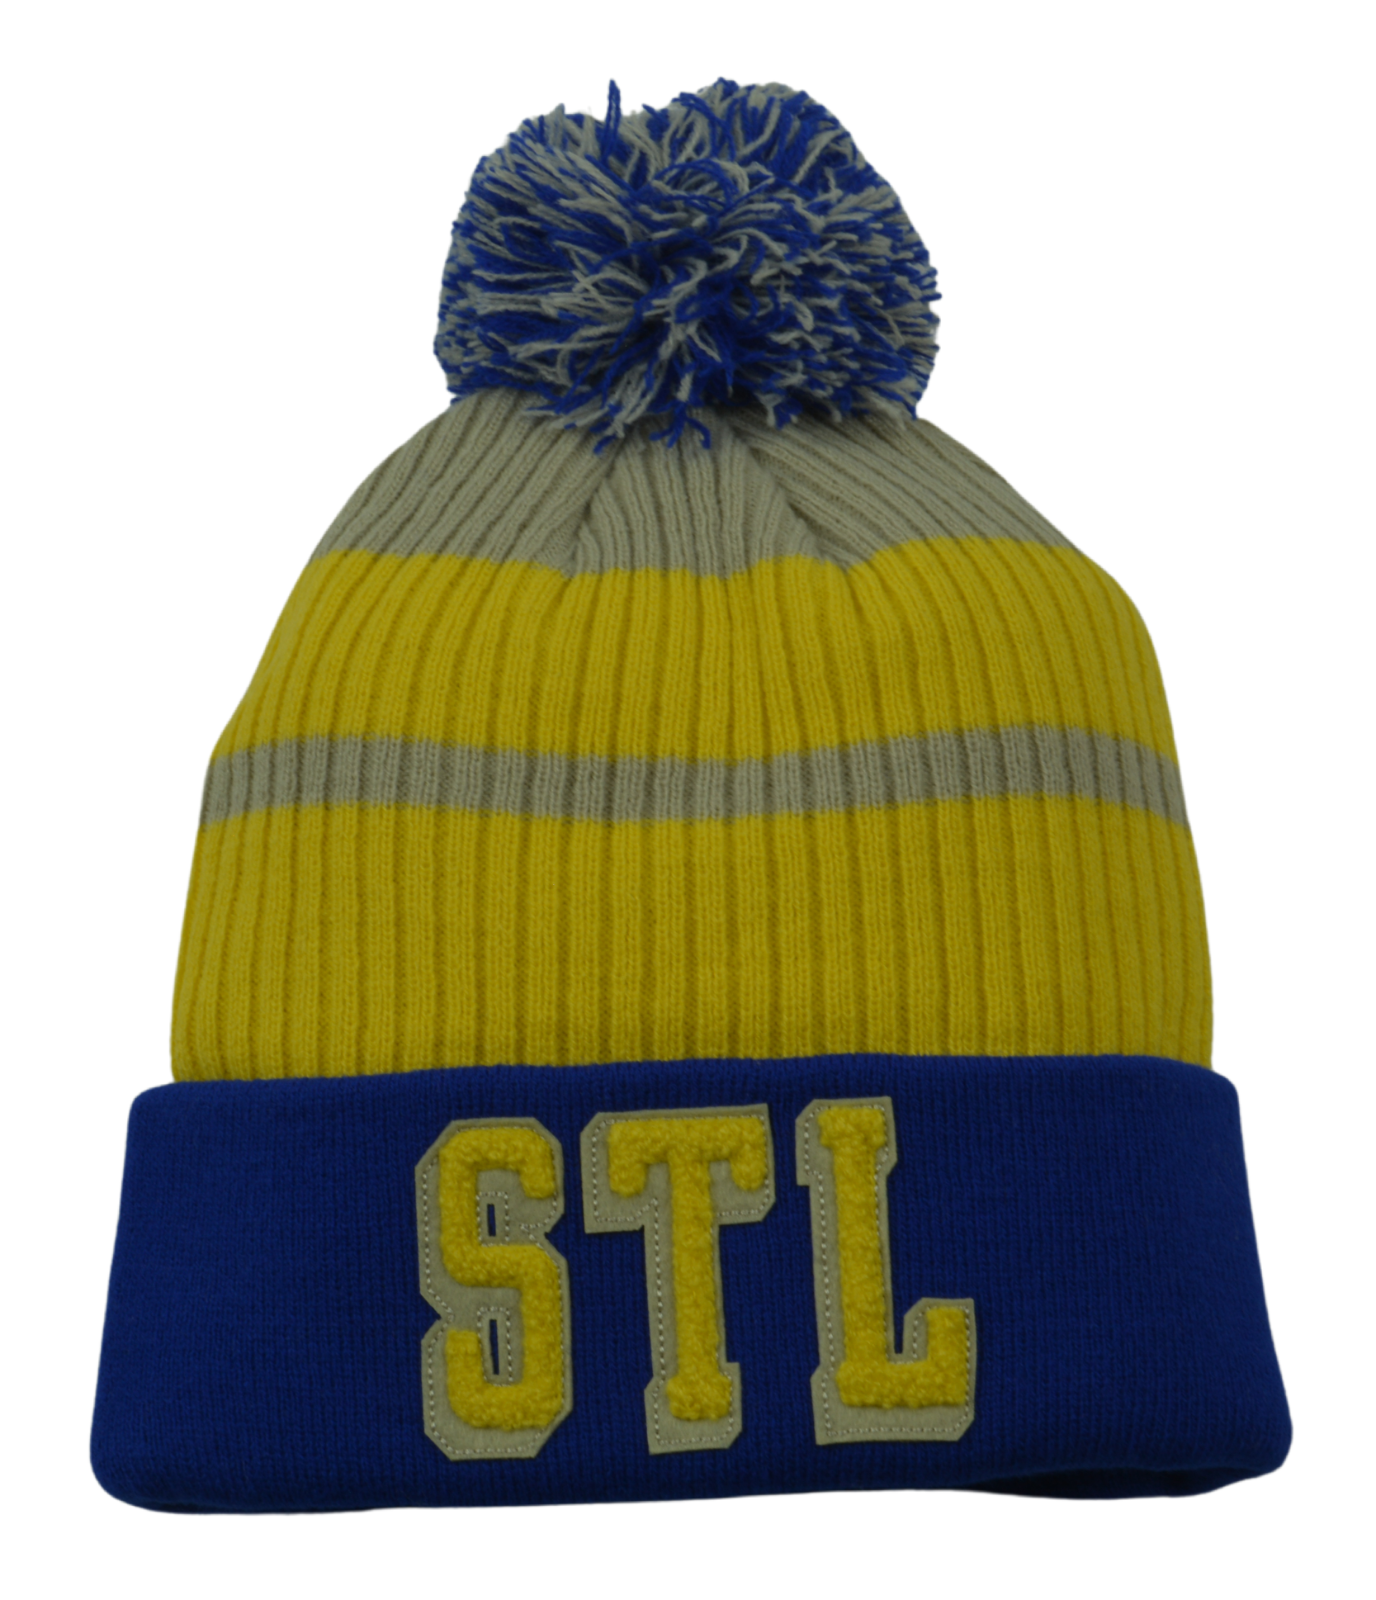 Primary image for St. Louis Blues Vintage NHL Hockey Throwback Pom Pom Knit Winter Hat Beanie